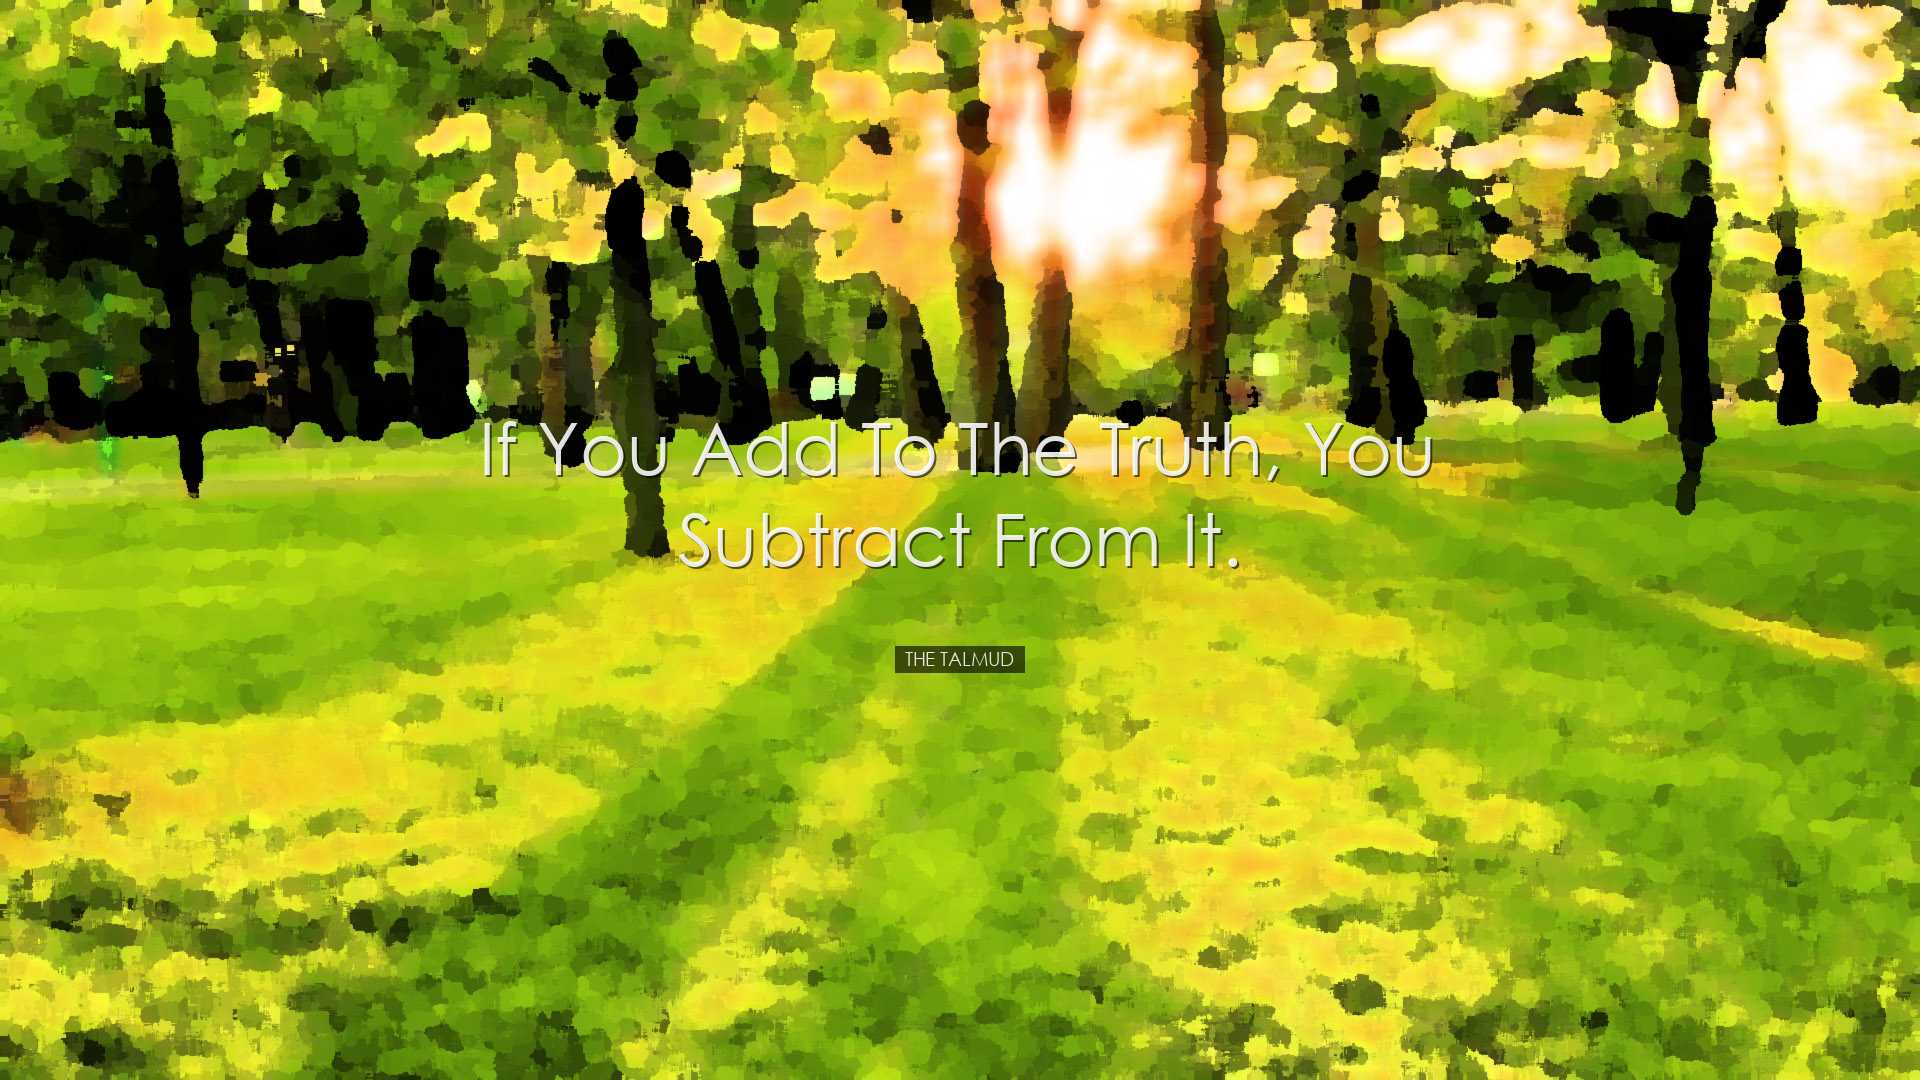 If you add to the truth, you subtract from it. - The Talmud